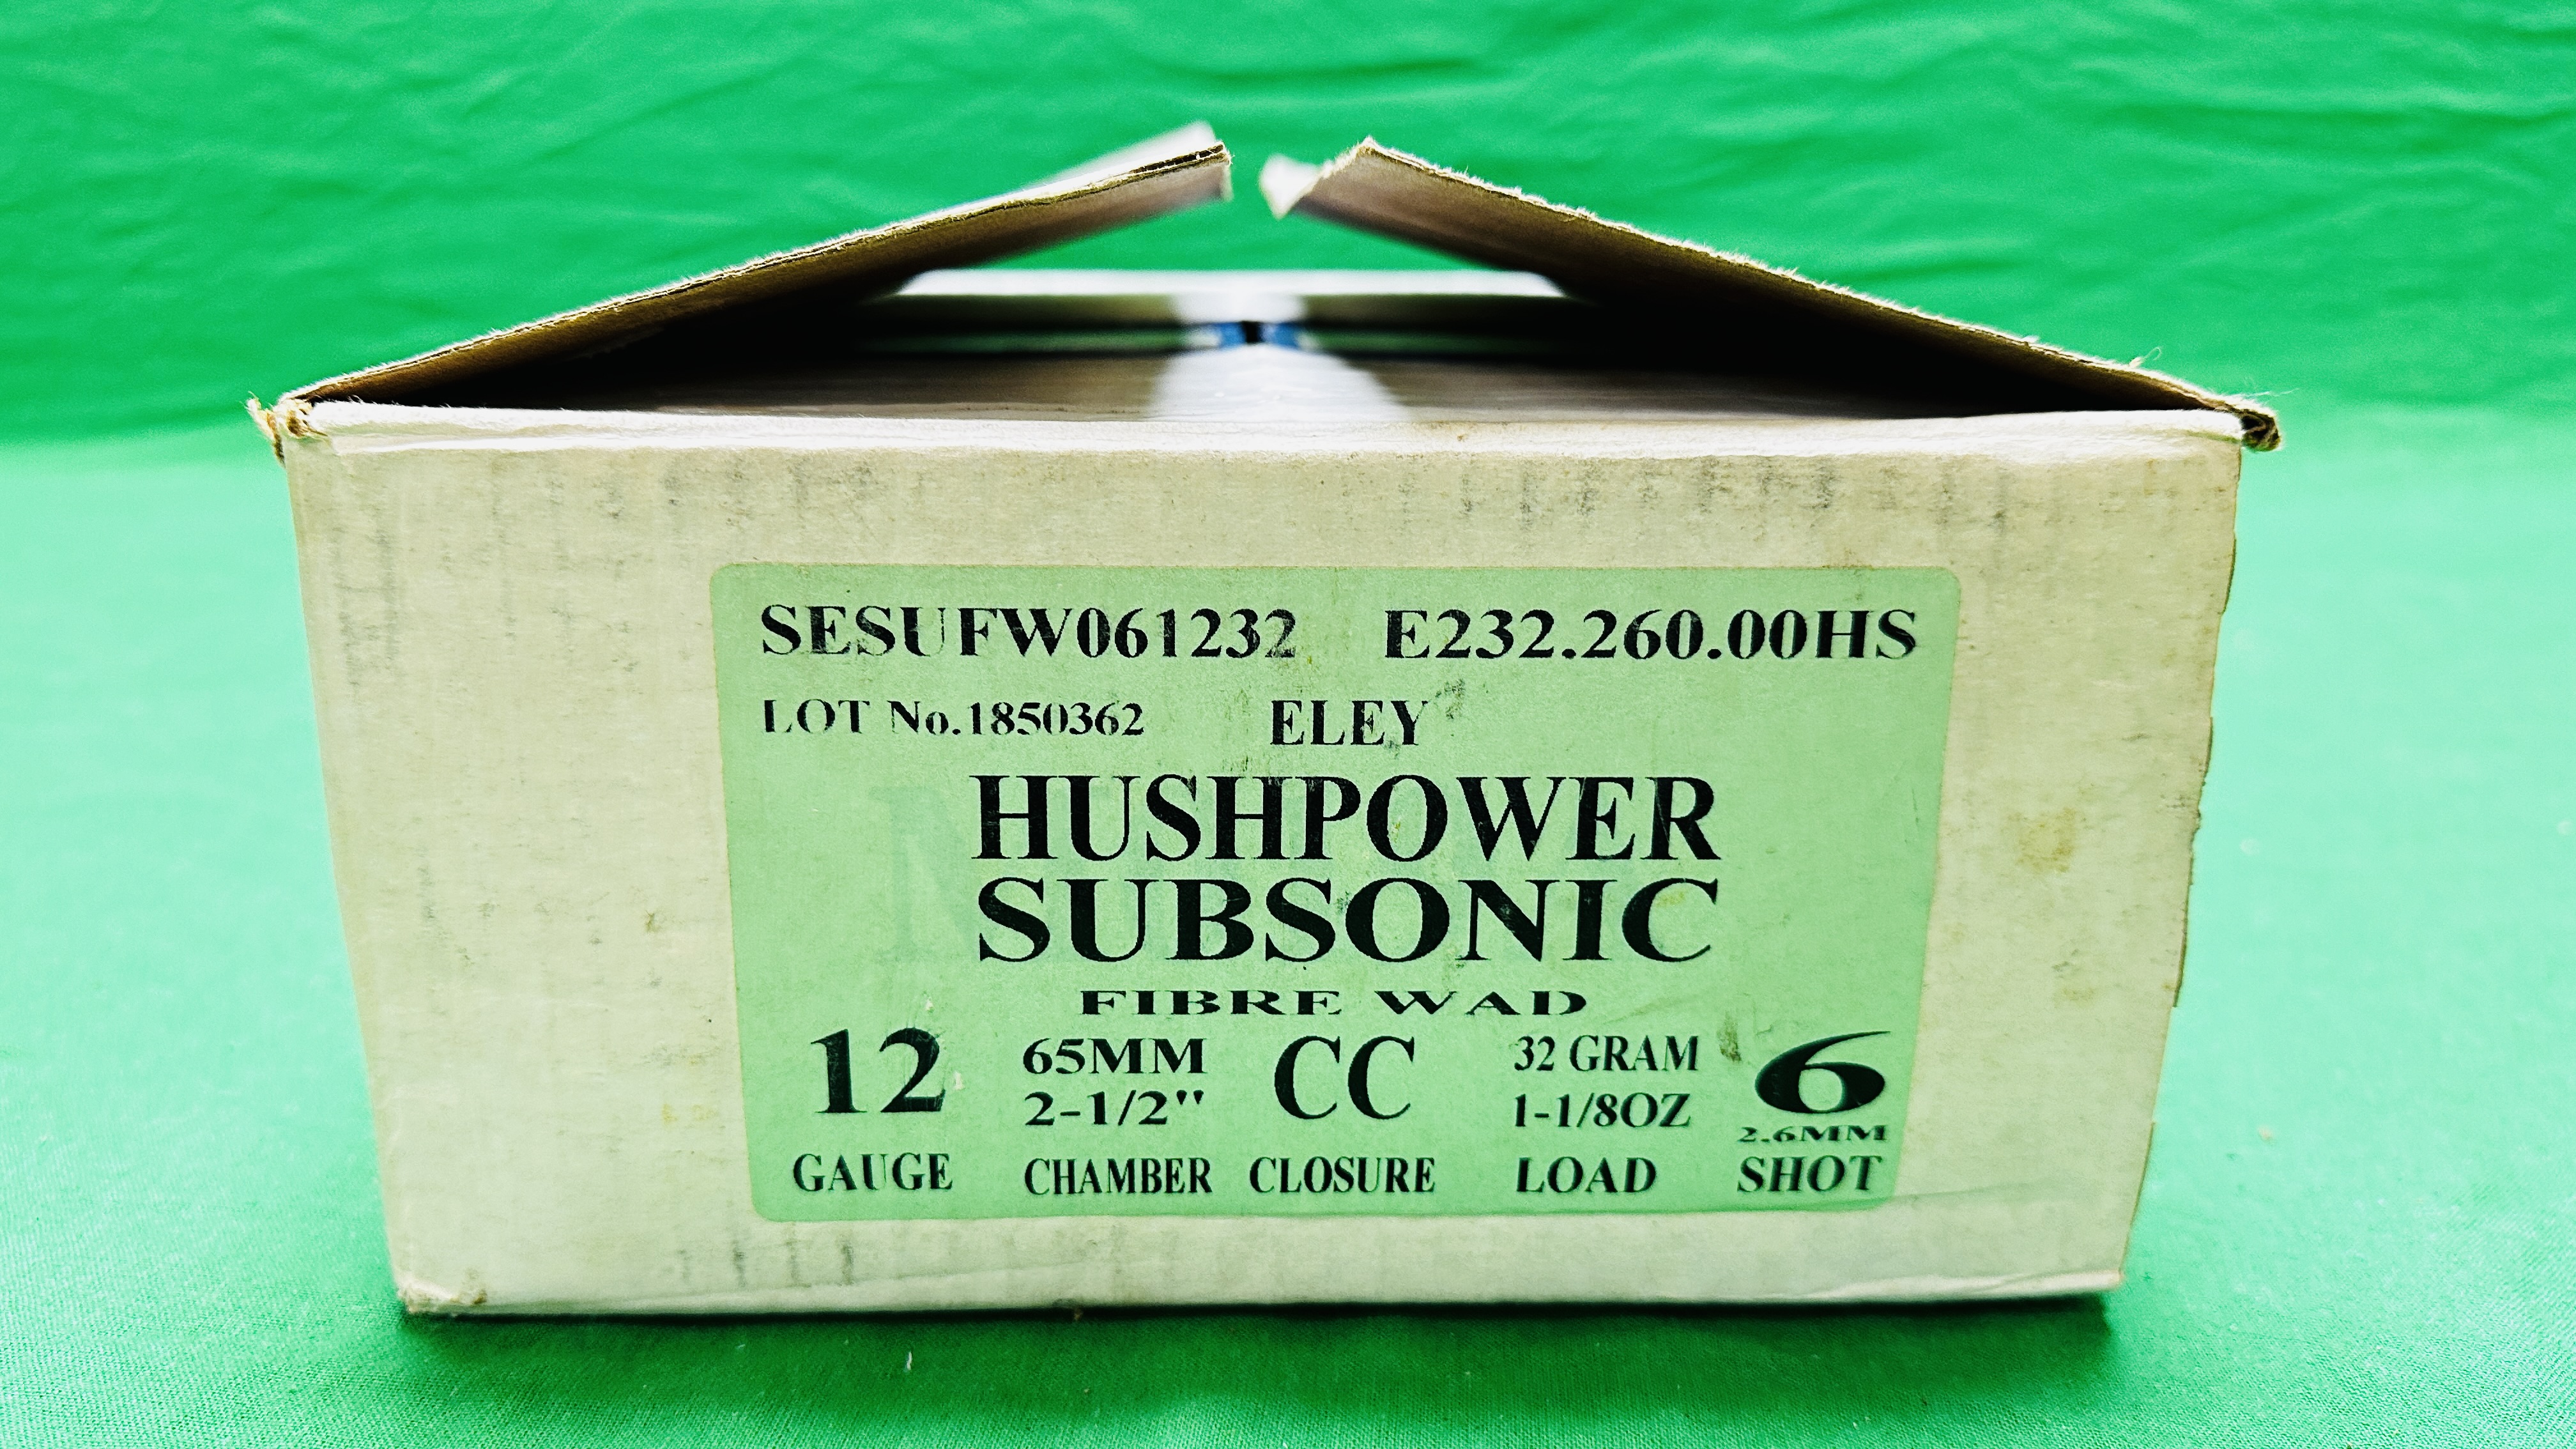 250 X HUSHPOWER SUBSONIC 12 GAUGE 32 GRM 6 SHOT FIBRE CARTRIDGES - (TO BE COLLECTED IN PERSON BY